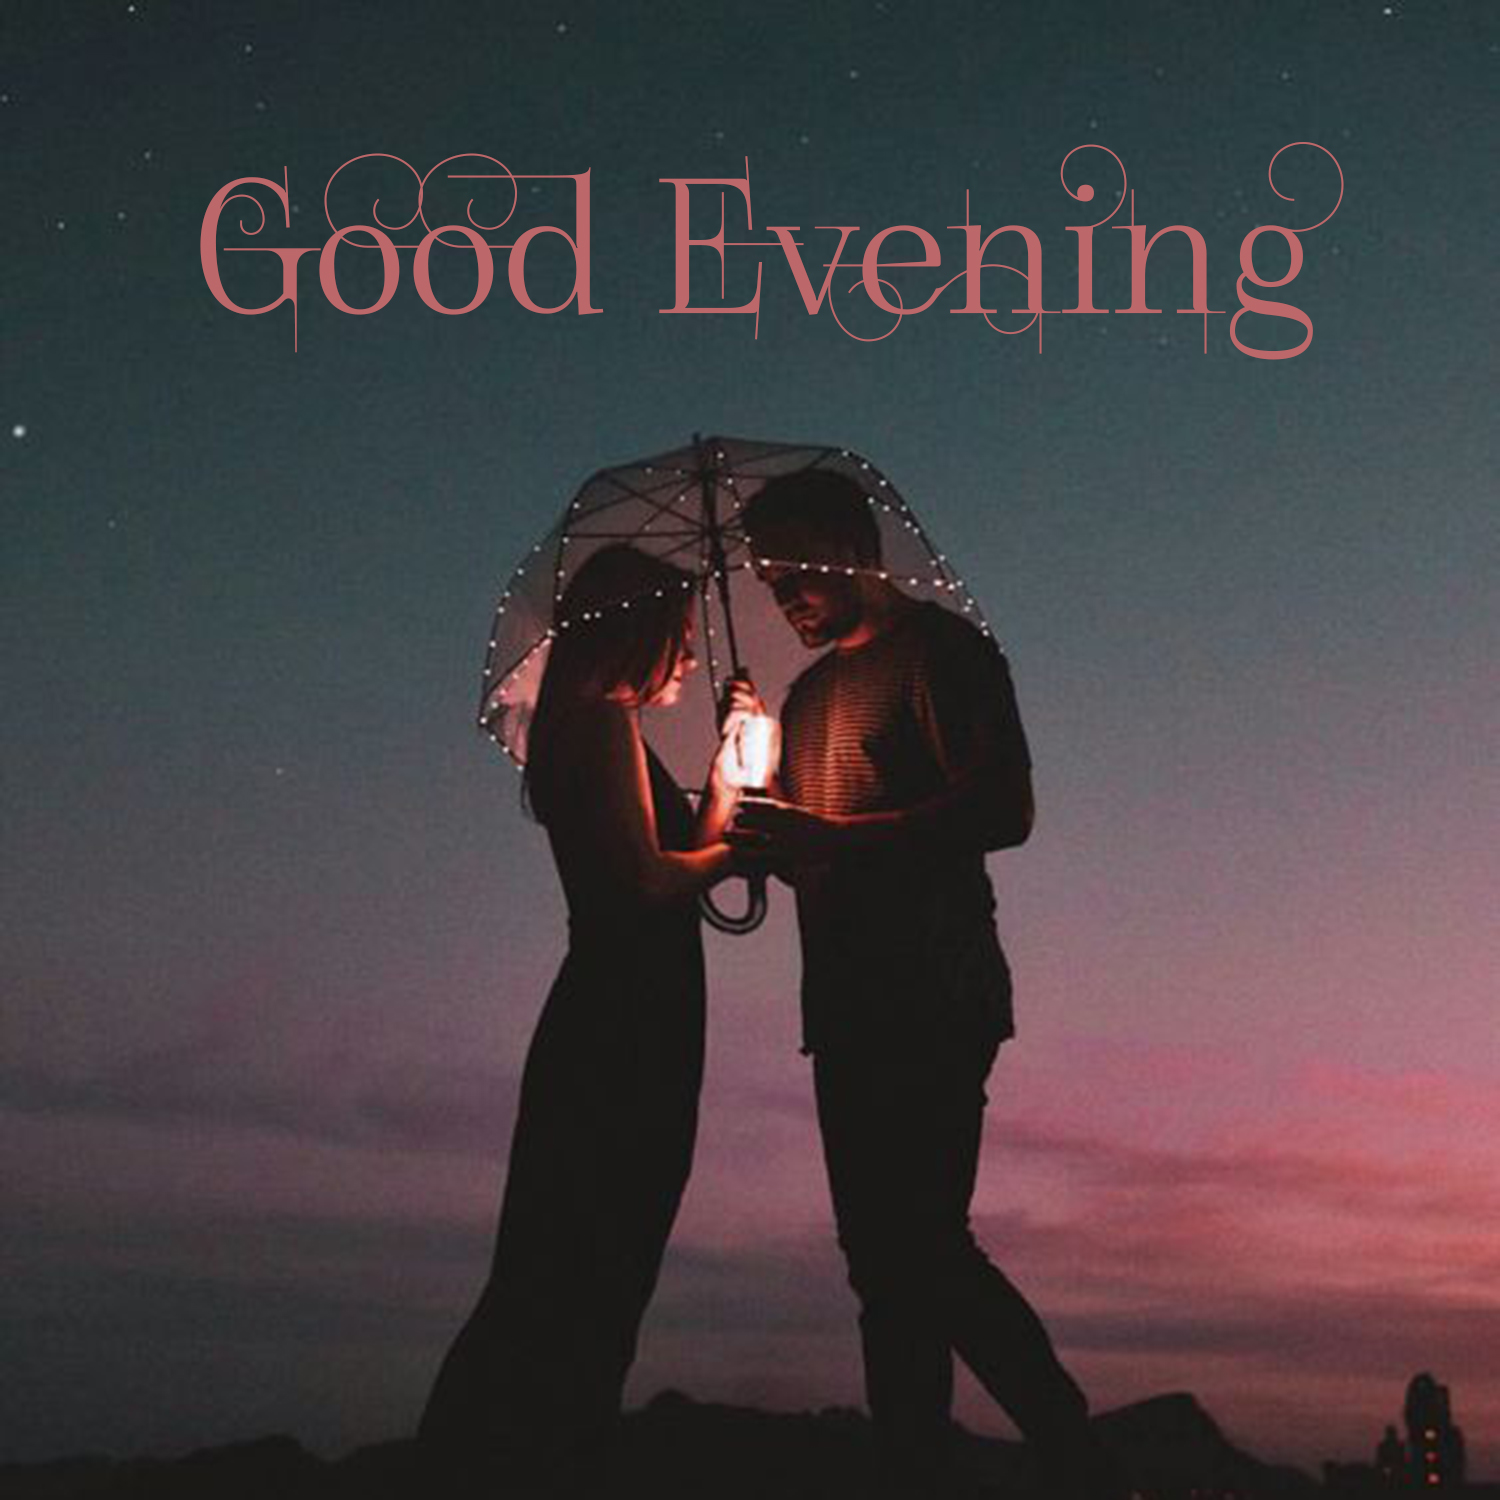 Good Evening Couple Image Morning Quotes Wishes